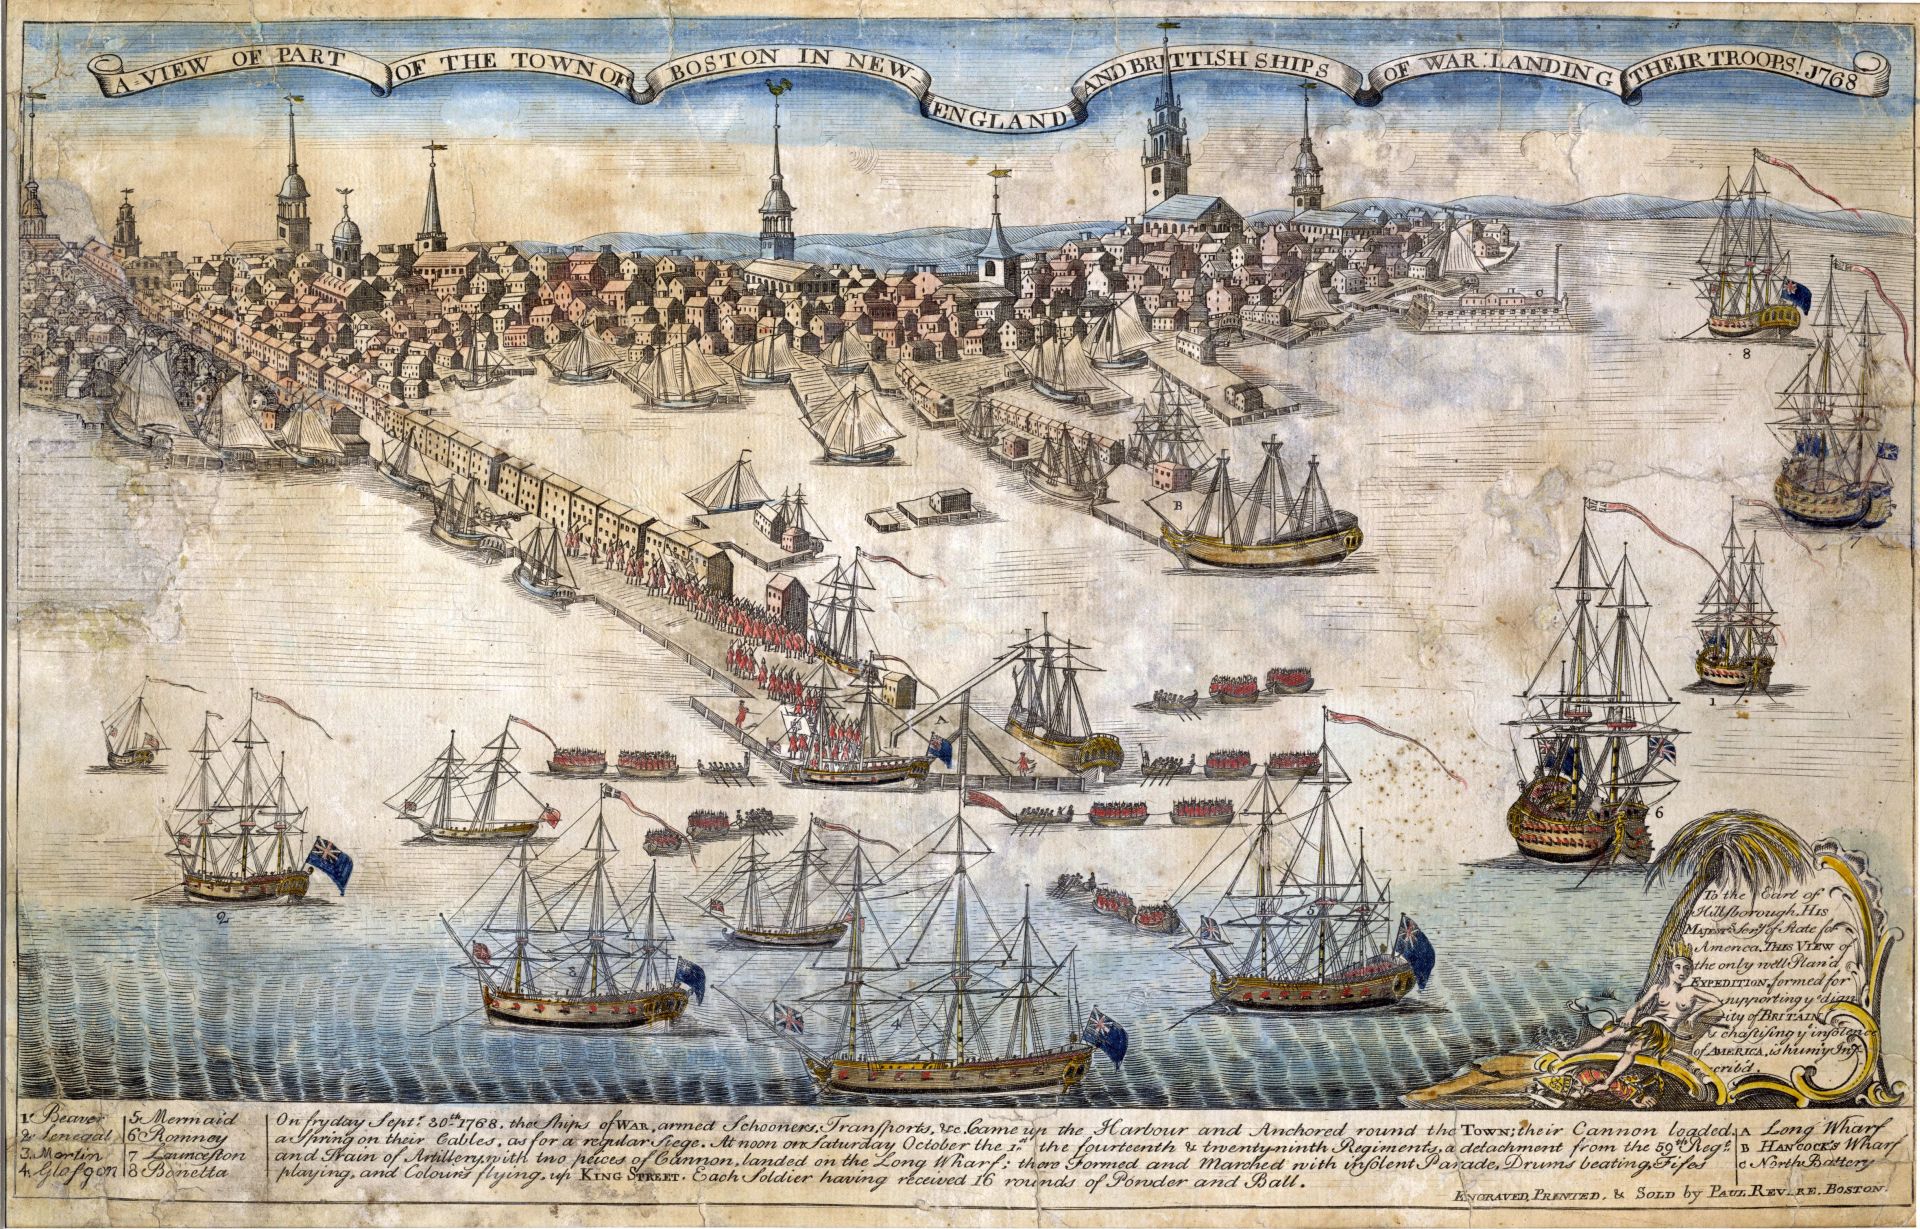 Paul Revere also published an engraving of the British troops landing in Boston harbor in 1768, a traumatic event for many inhabitants of the city.